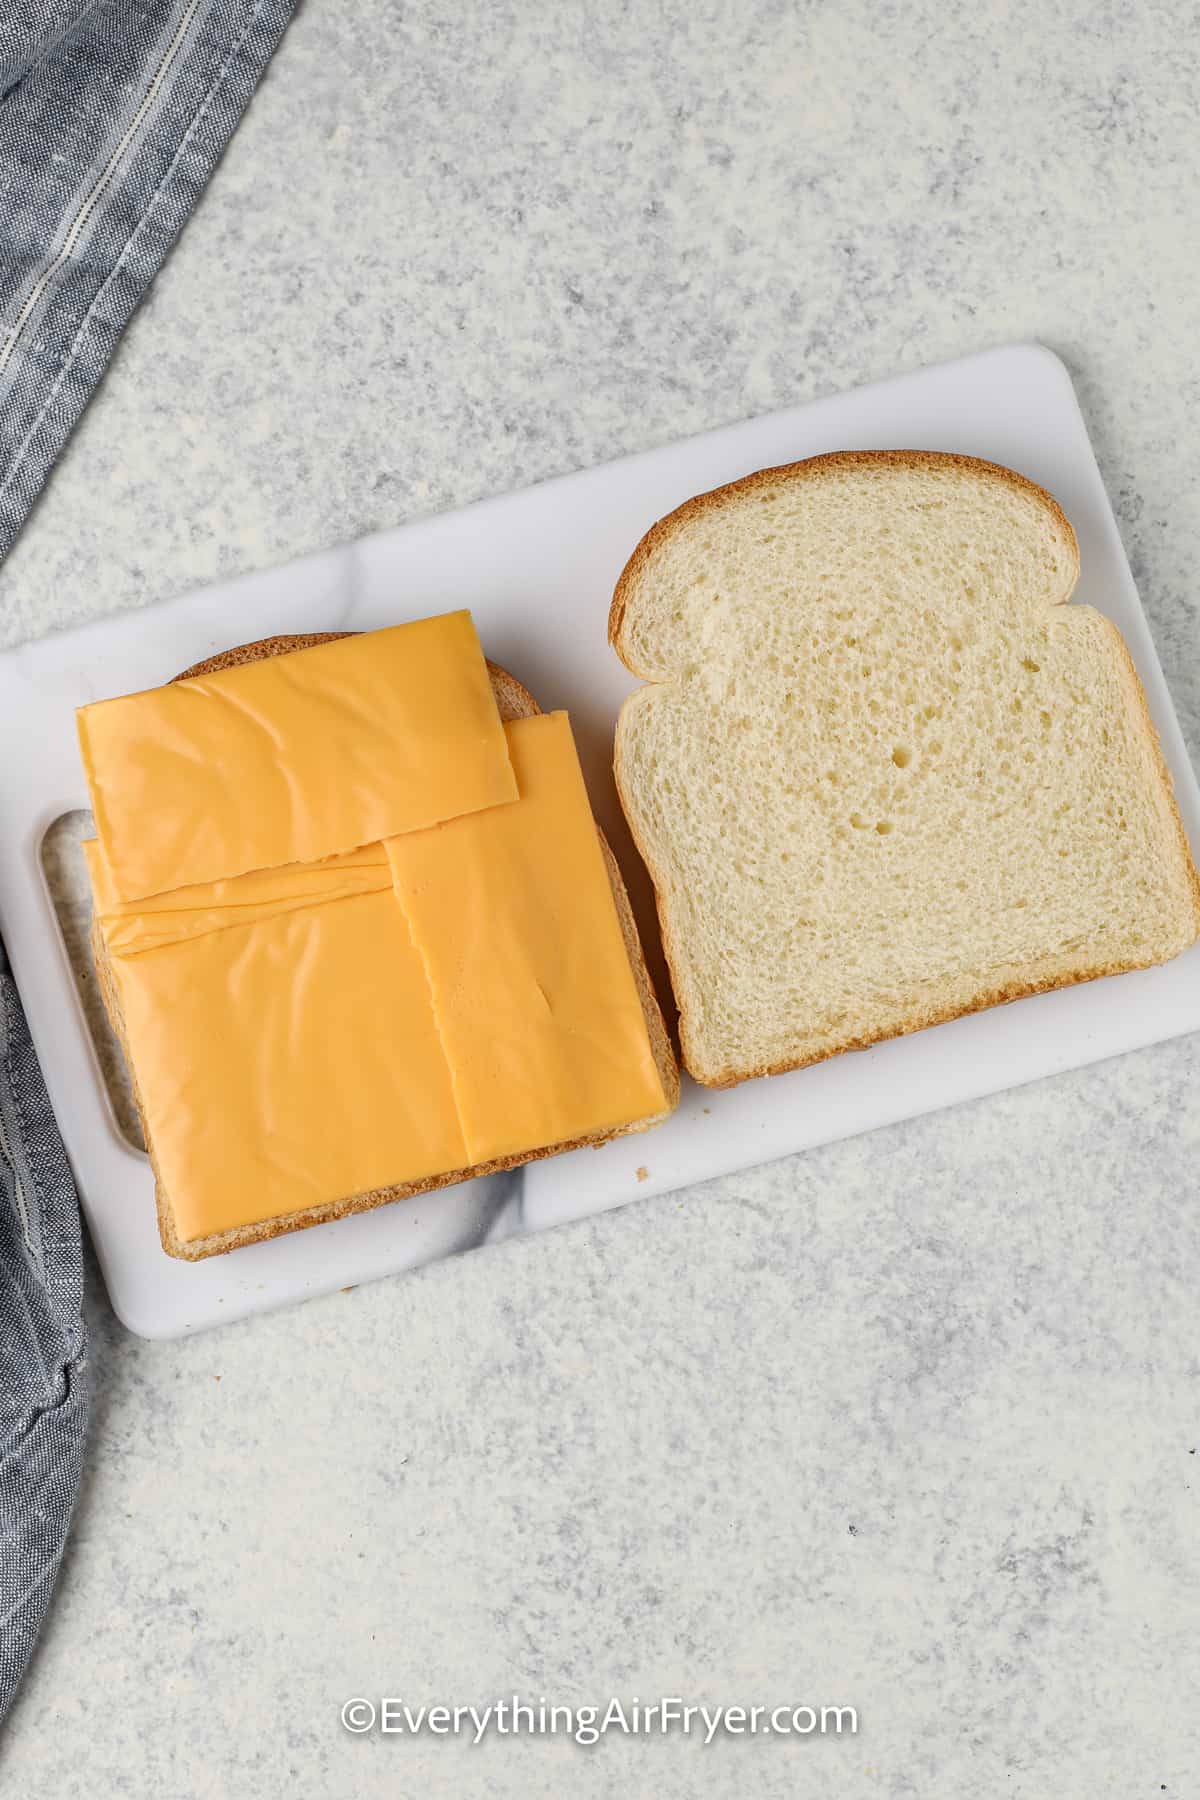 cheese slices placed on bread